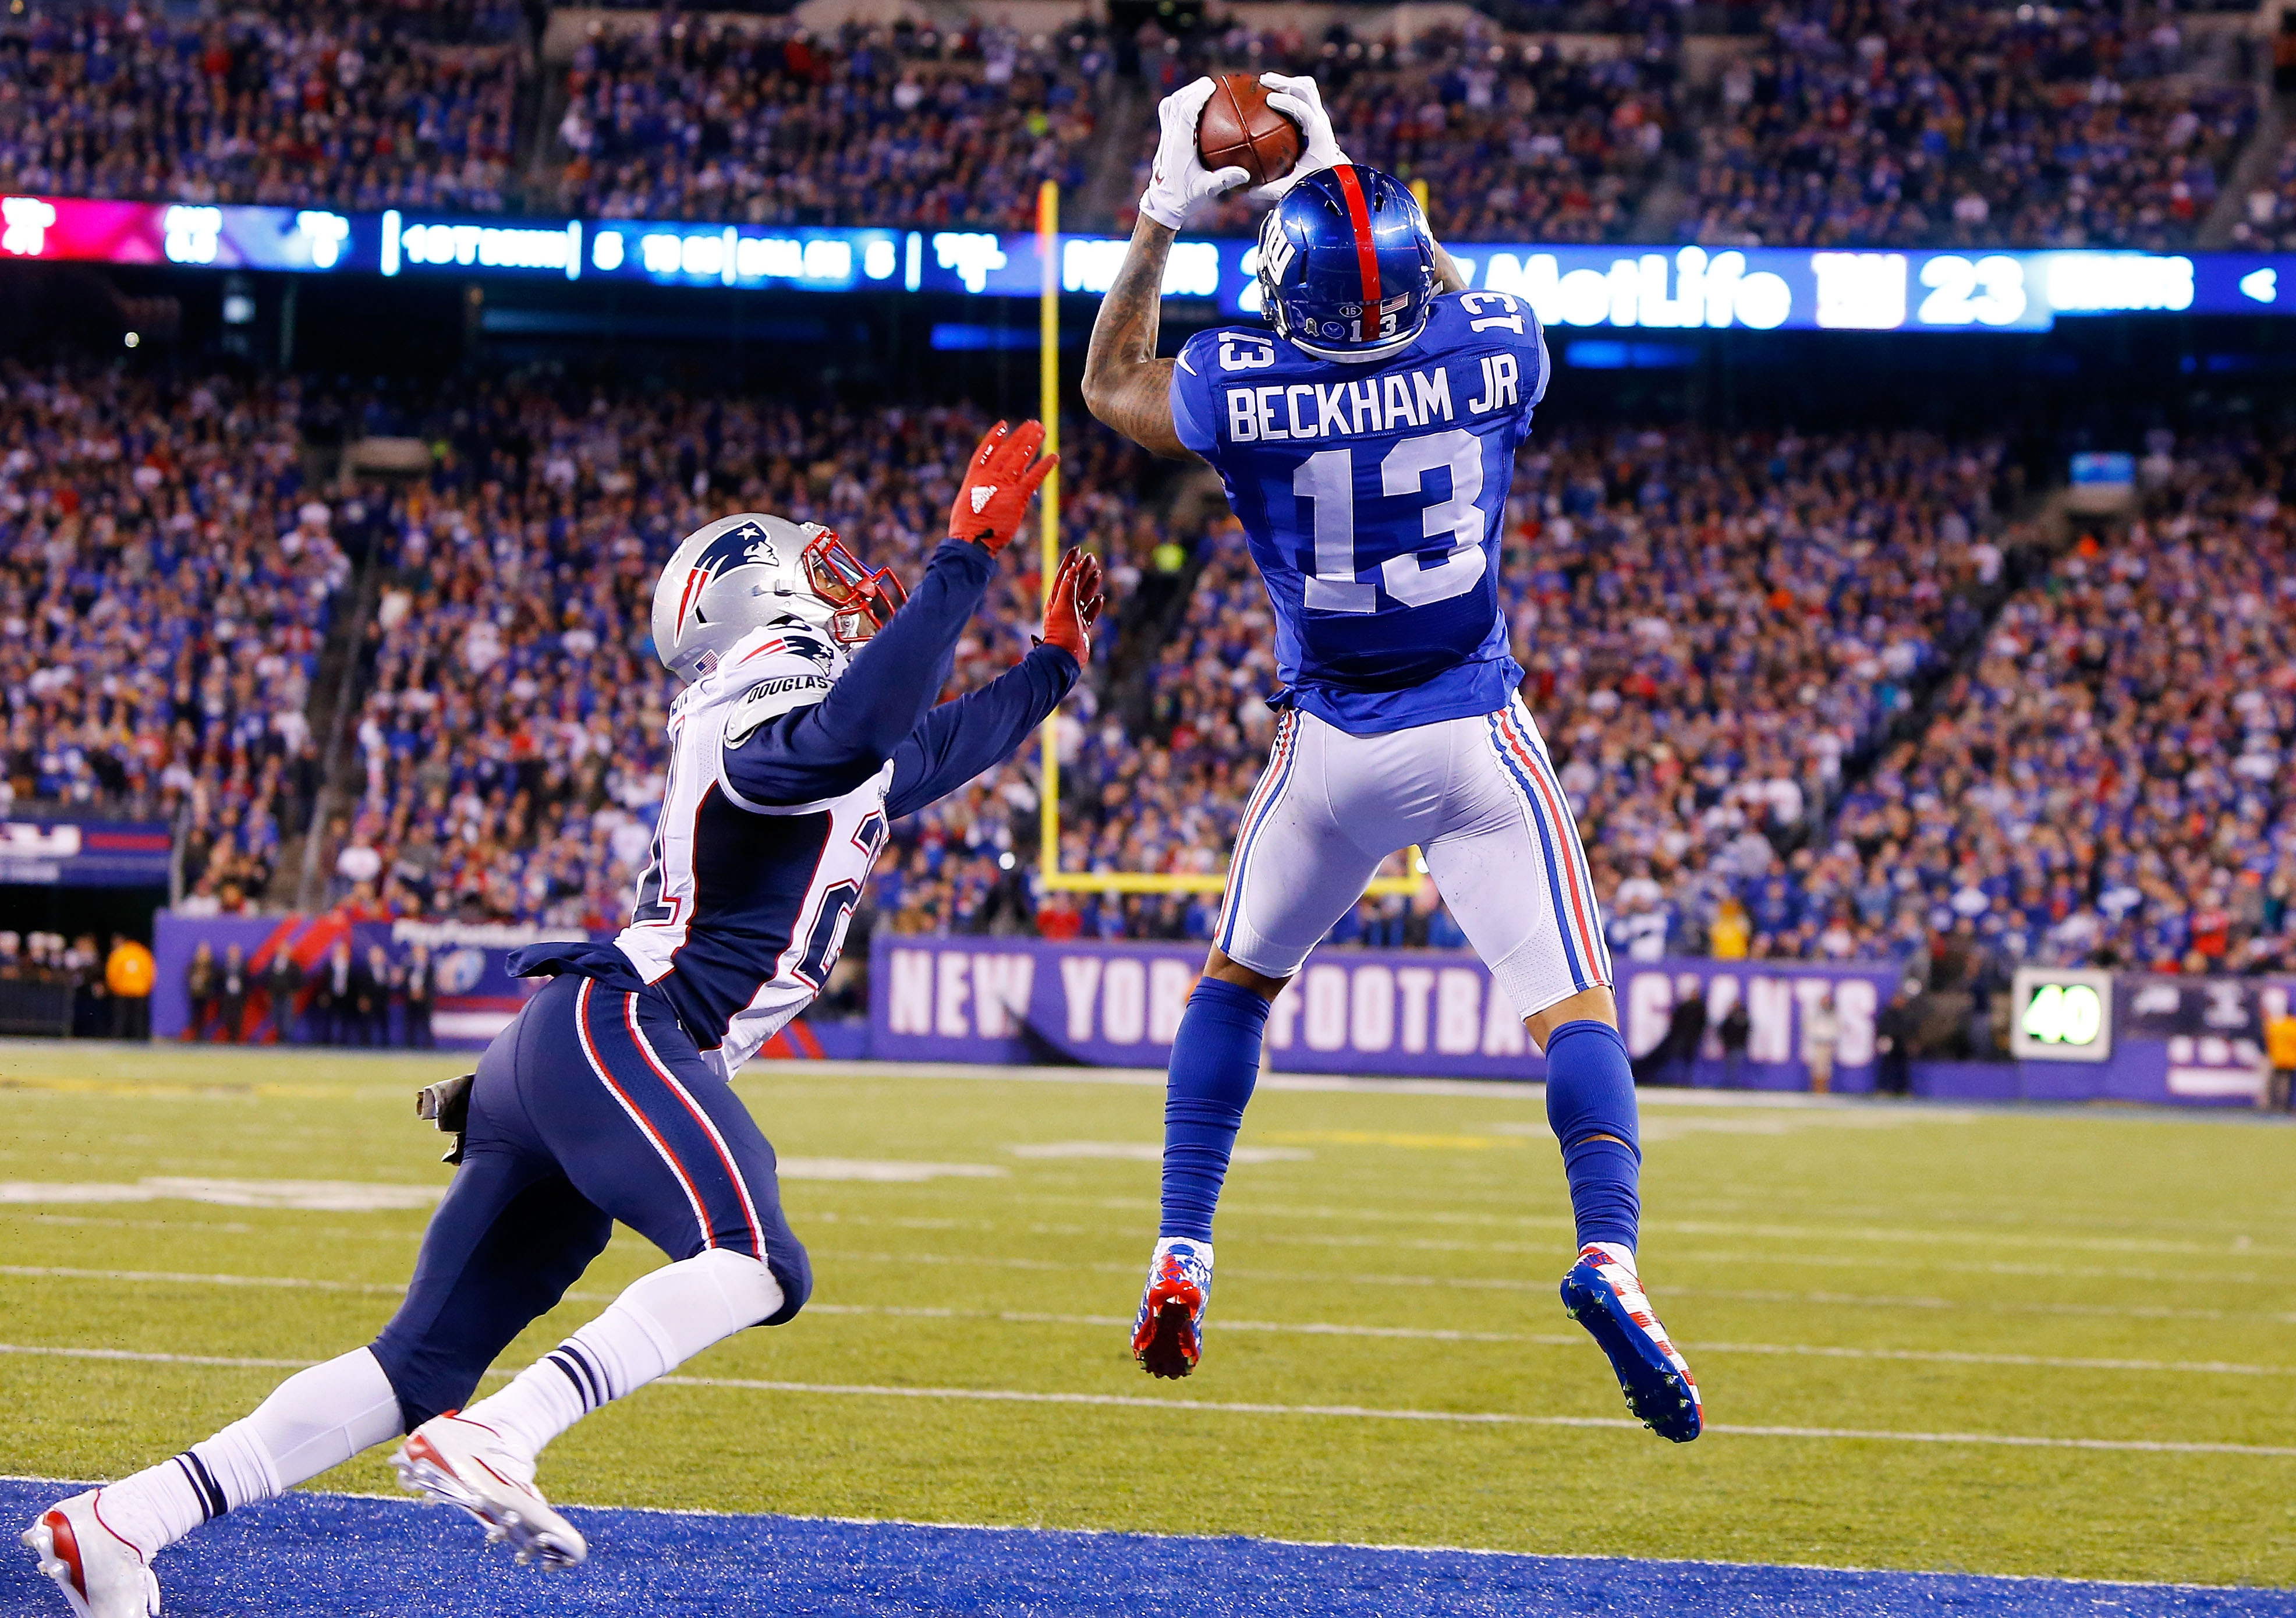 Odell Beckham #13 of the New York Giants in action against Malcolm Butler #21 of the New England Patriots on November 15, 2015 at MetLife Stadium in East Rutherford, New Jersey. The Patriots defeated the Giants 27-26.  (Photo by Jim McIsaac/Getty Images)